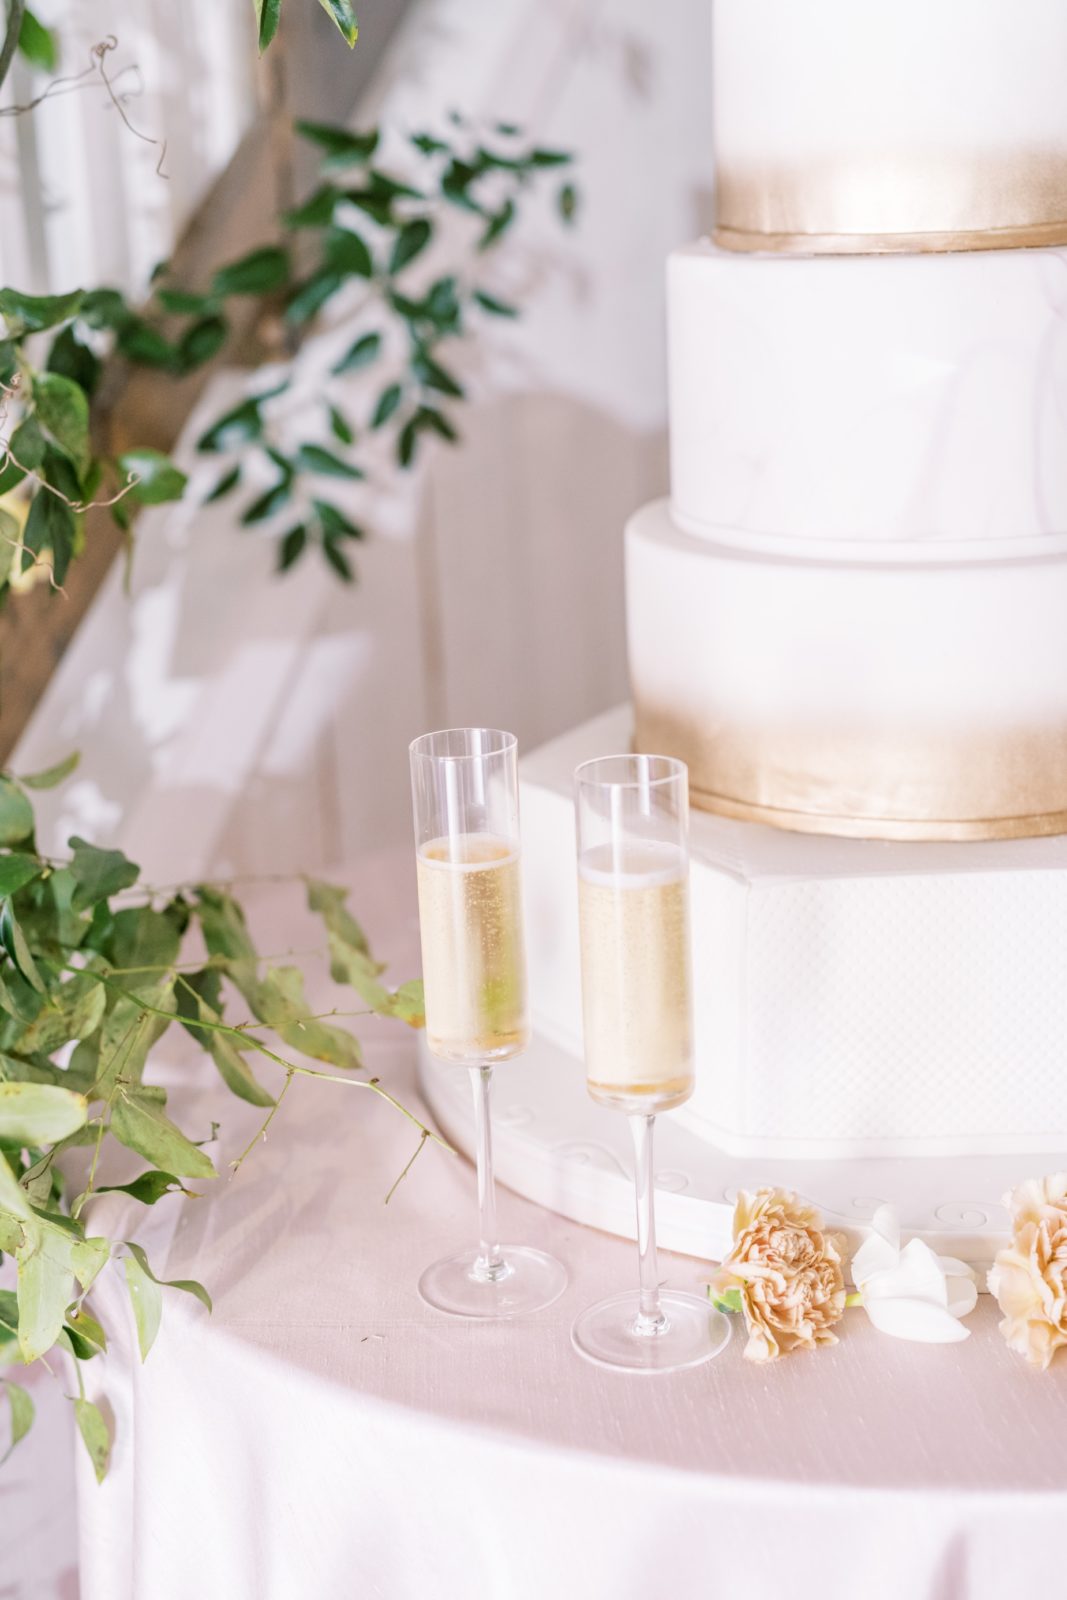 Gold brushed wedding cake with two tall glasses of champagne next to the cake by Christina Elliott Photography. champagne and cake #ChristinaElliottPhotography #ChristinaElliottWeddings #Houstonwedding #TheSpringsVenue #EastHoustonweddings